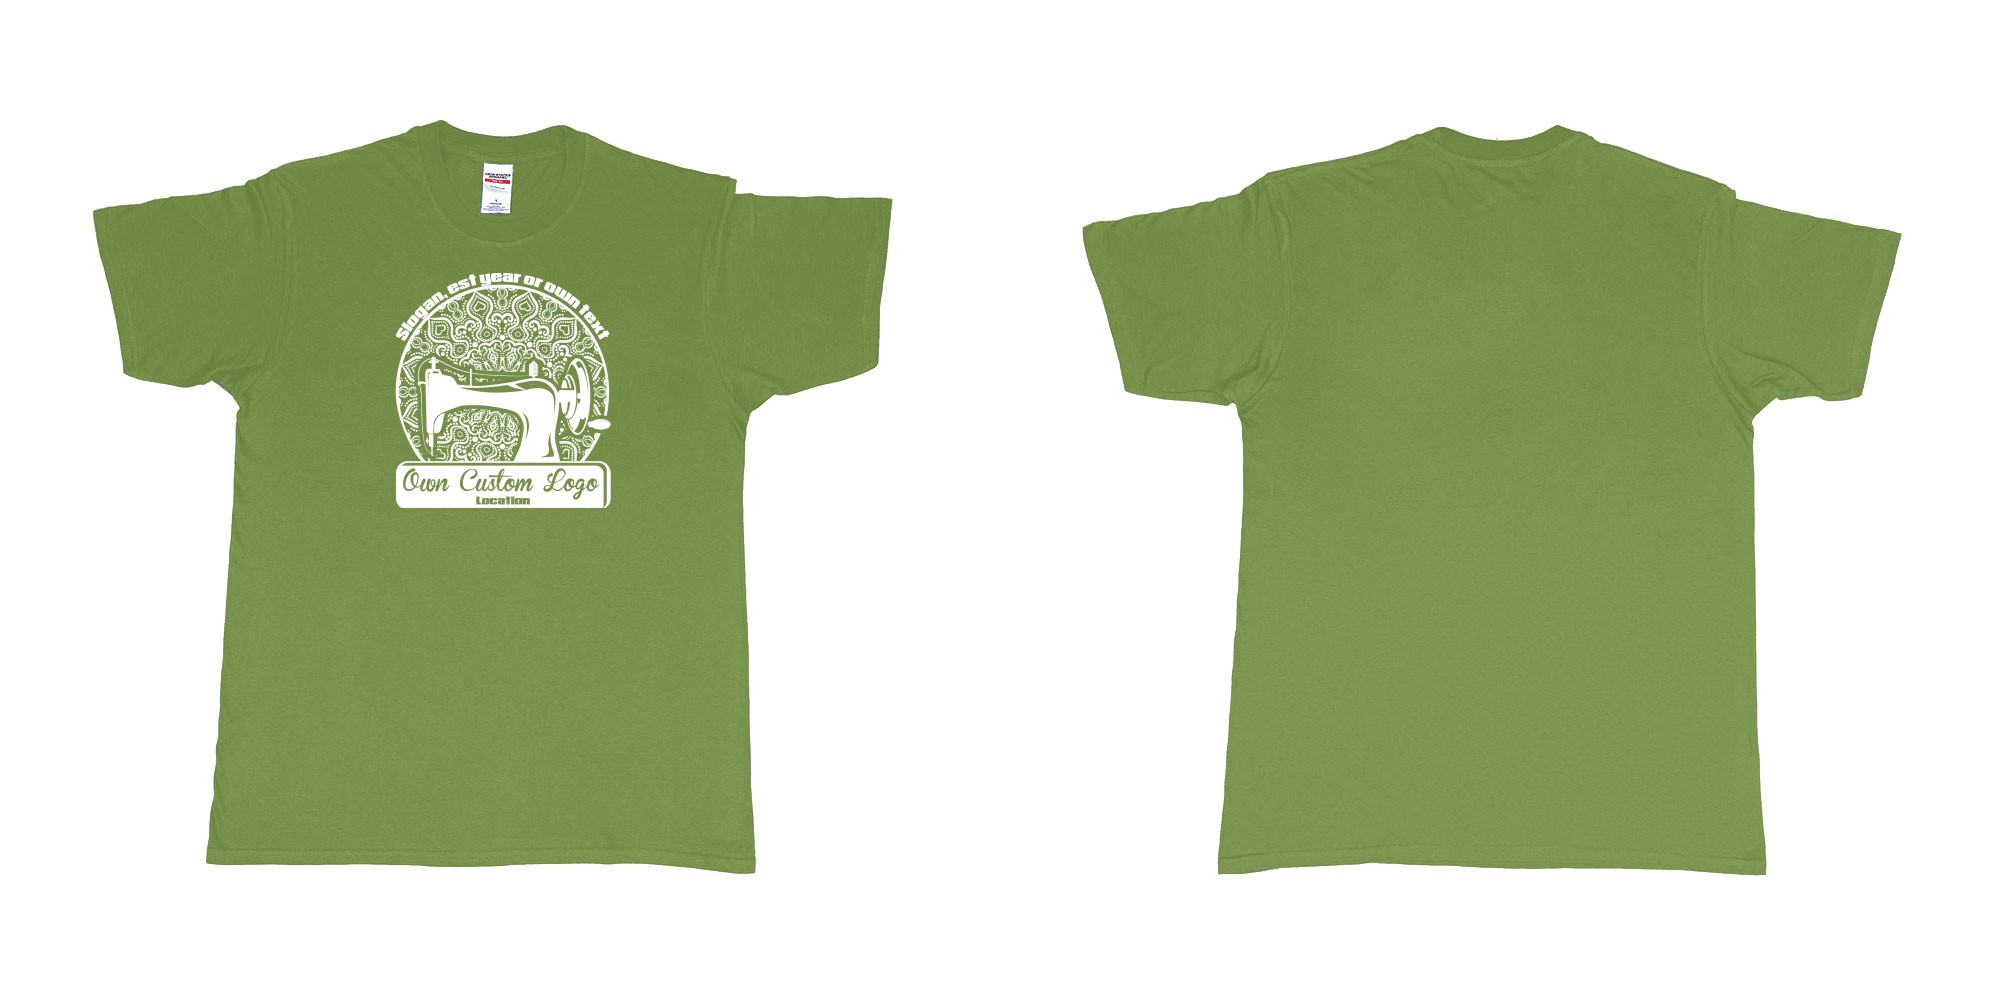 Custom tshirt design sewing machine in fabric color military-green choice your own text made in Bali by The Pirate Way